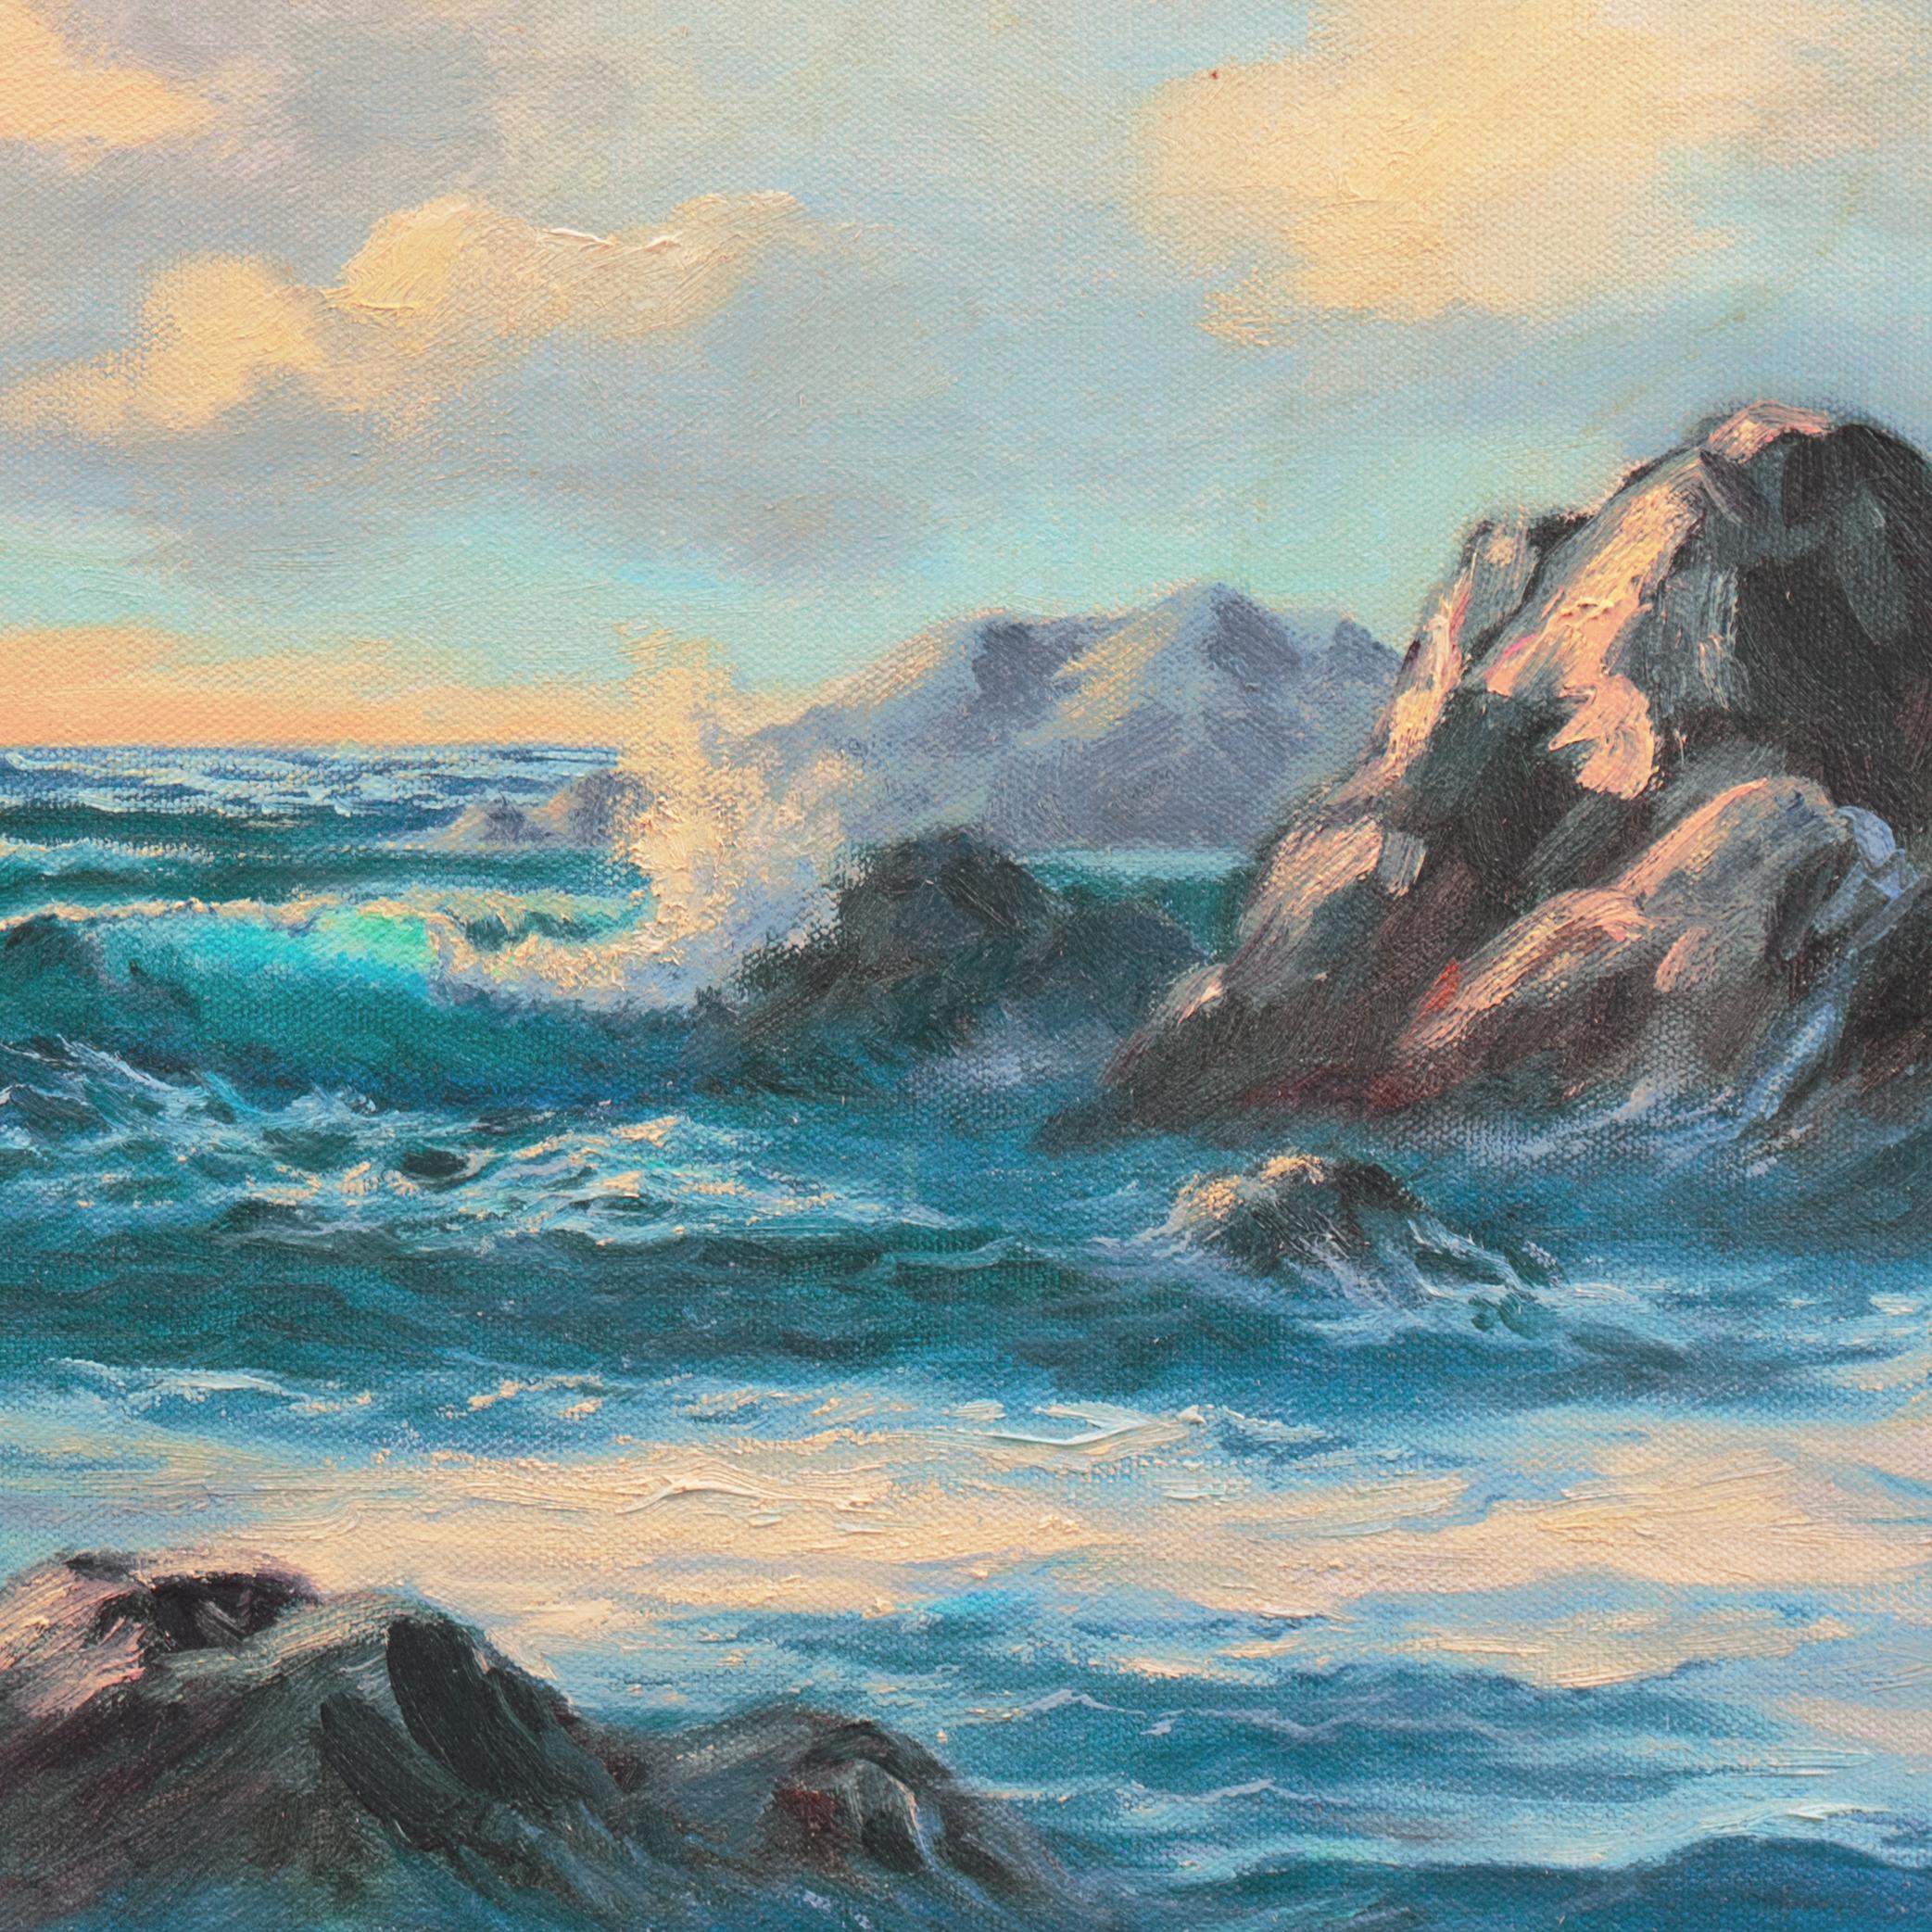 Signed lower left, 'Norma Webb' (American, 20th century) and painted circa 2000. Additionally signed, verso, stamped with artist address and titled, 'Sea and Rocks'. 

A vibrant oil on on canvas showing a view of evening breakers crashing against